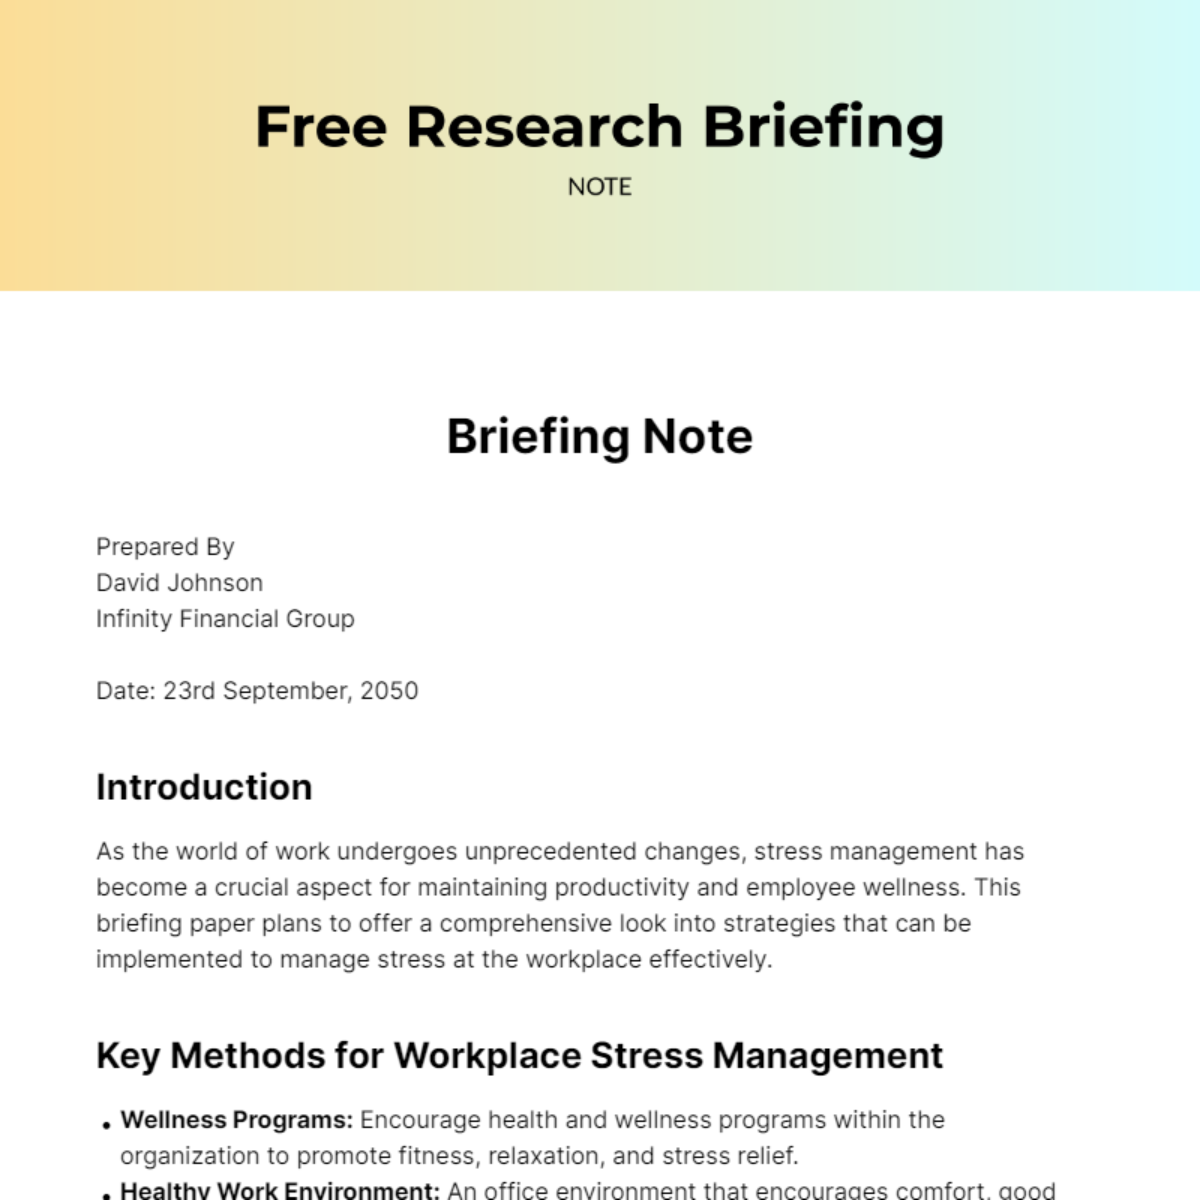 Free Research Briefing Note Template